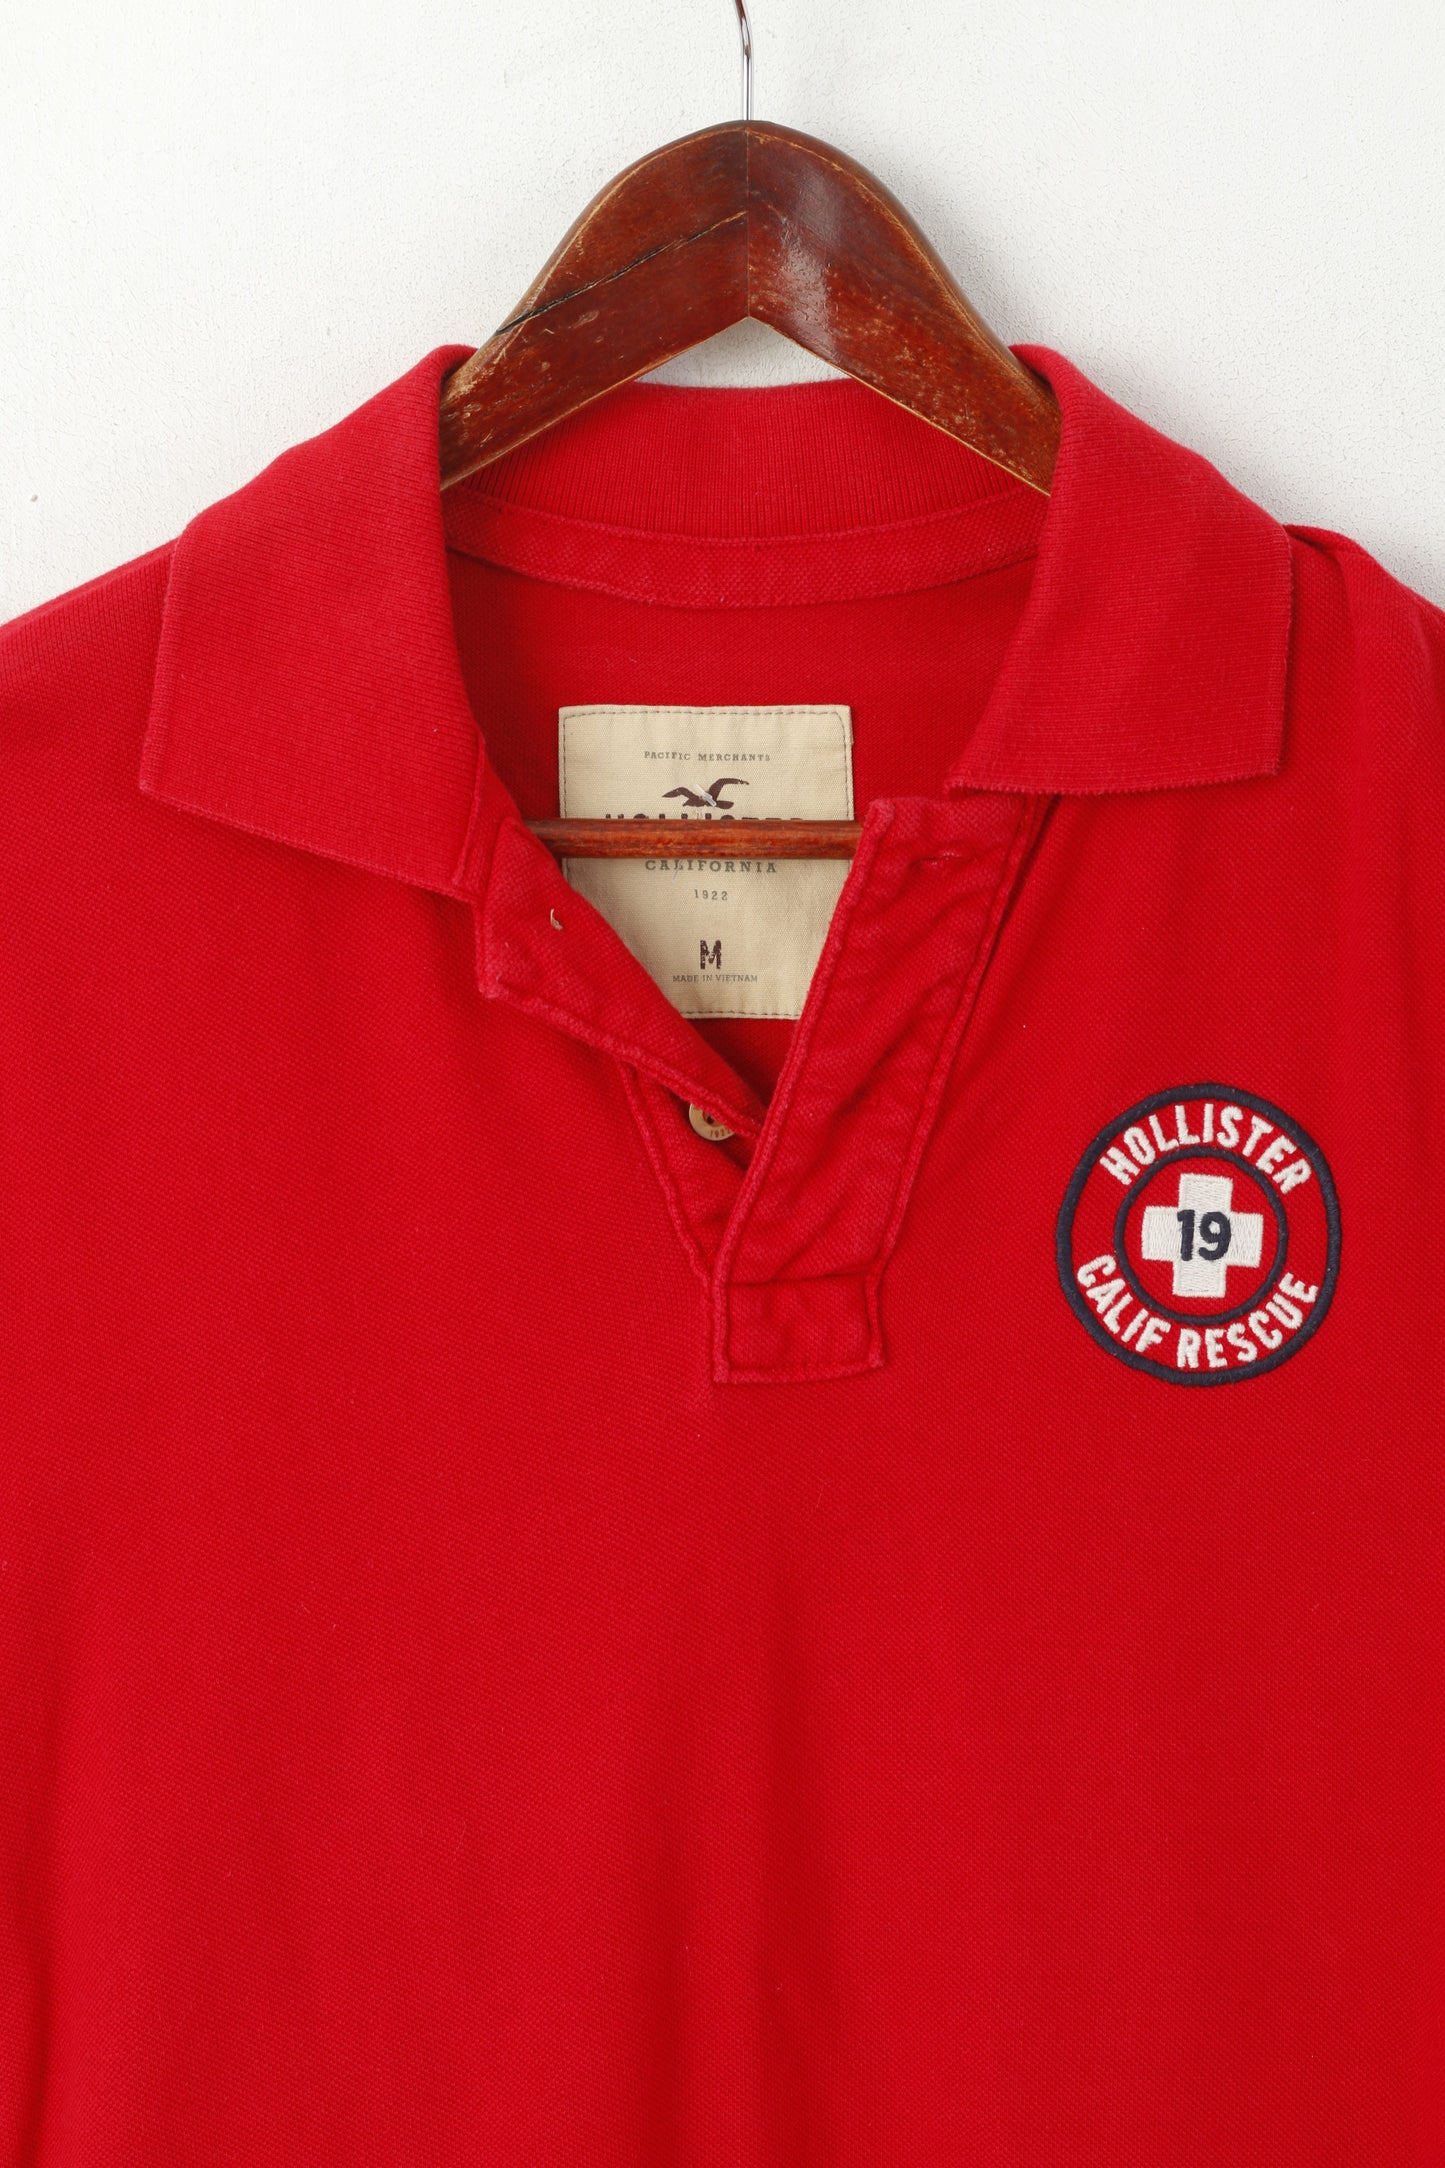 Hollister California Men M Polo Shirt Red Cotton Calif Rescue Slim Fit Top